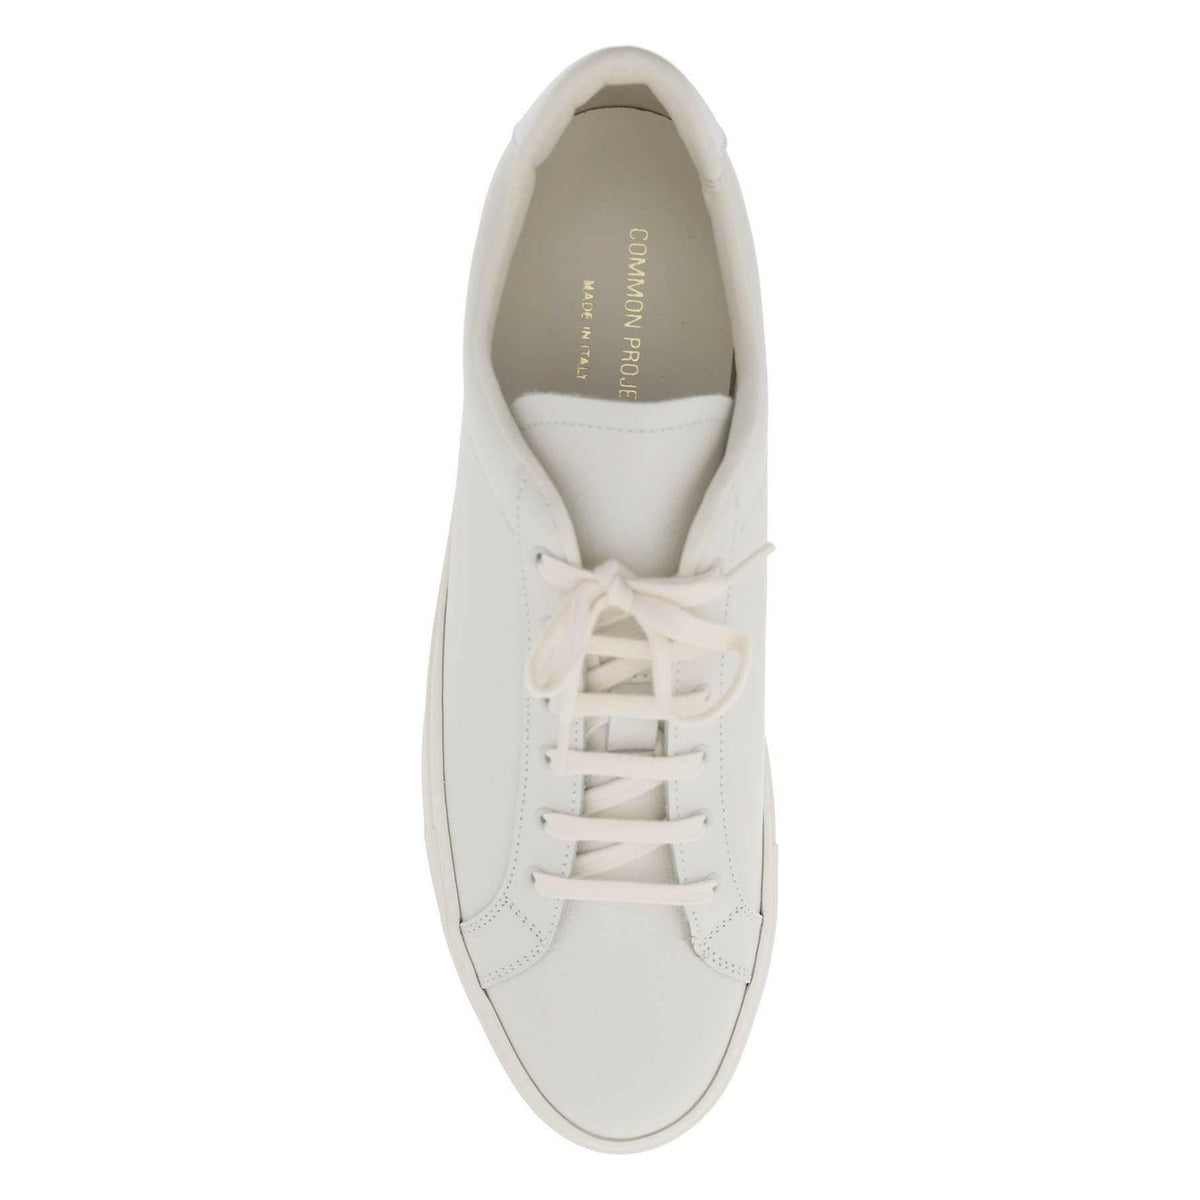 Vintage White Retro Low-Top Leather Sneakers COMMON PROJECTS JOHN JULIA.